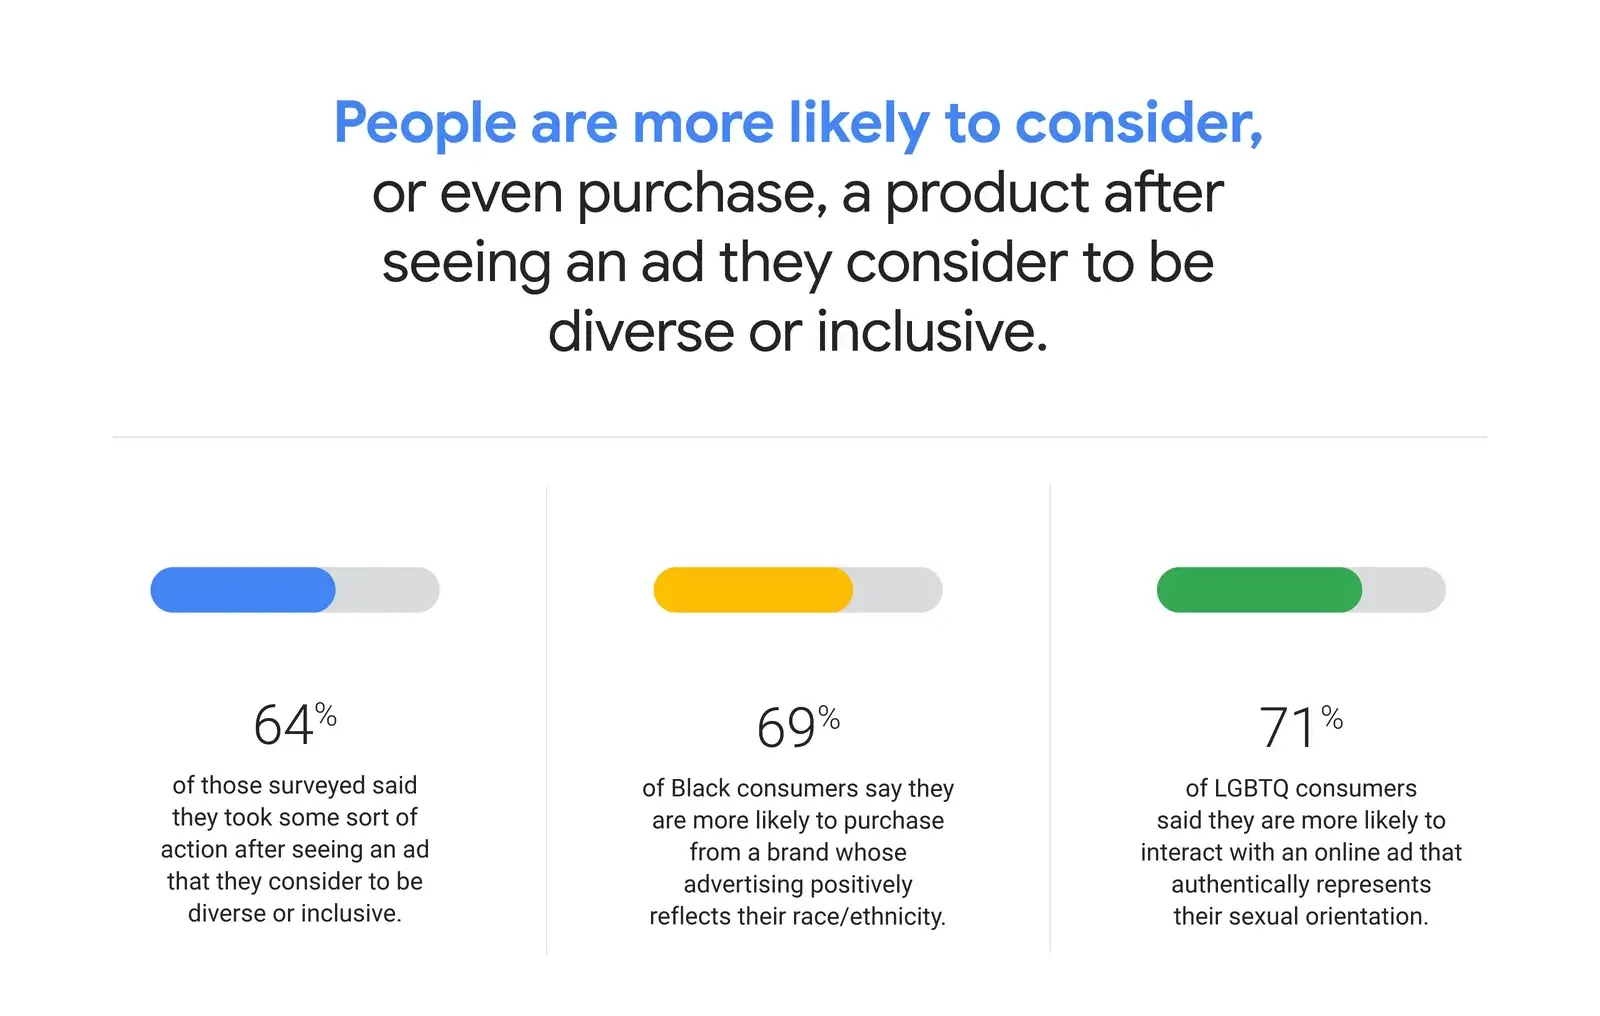 Chart about how inclusive ads are affecting consumer behavior